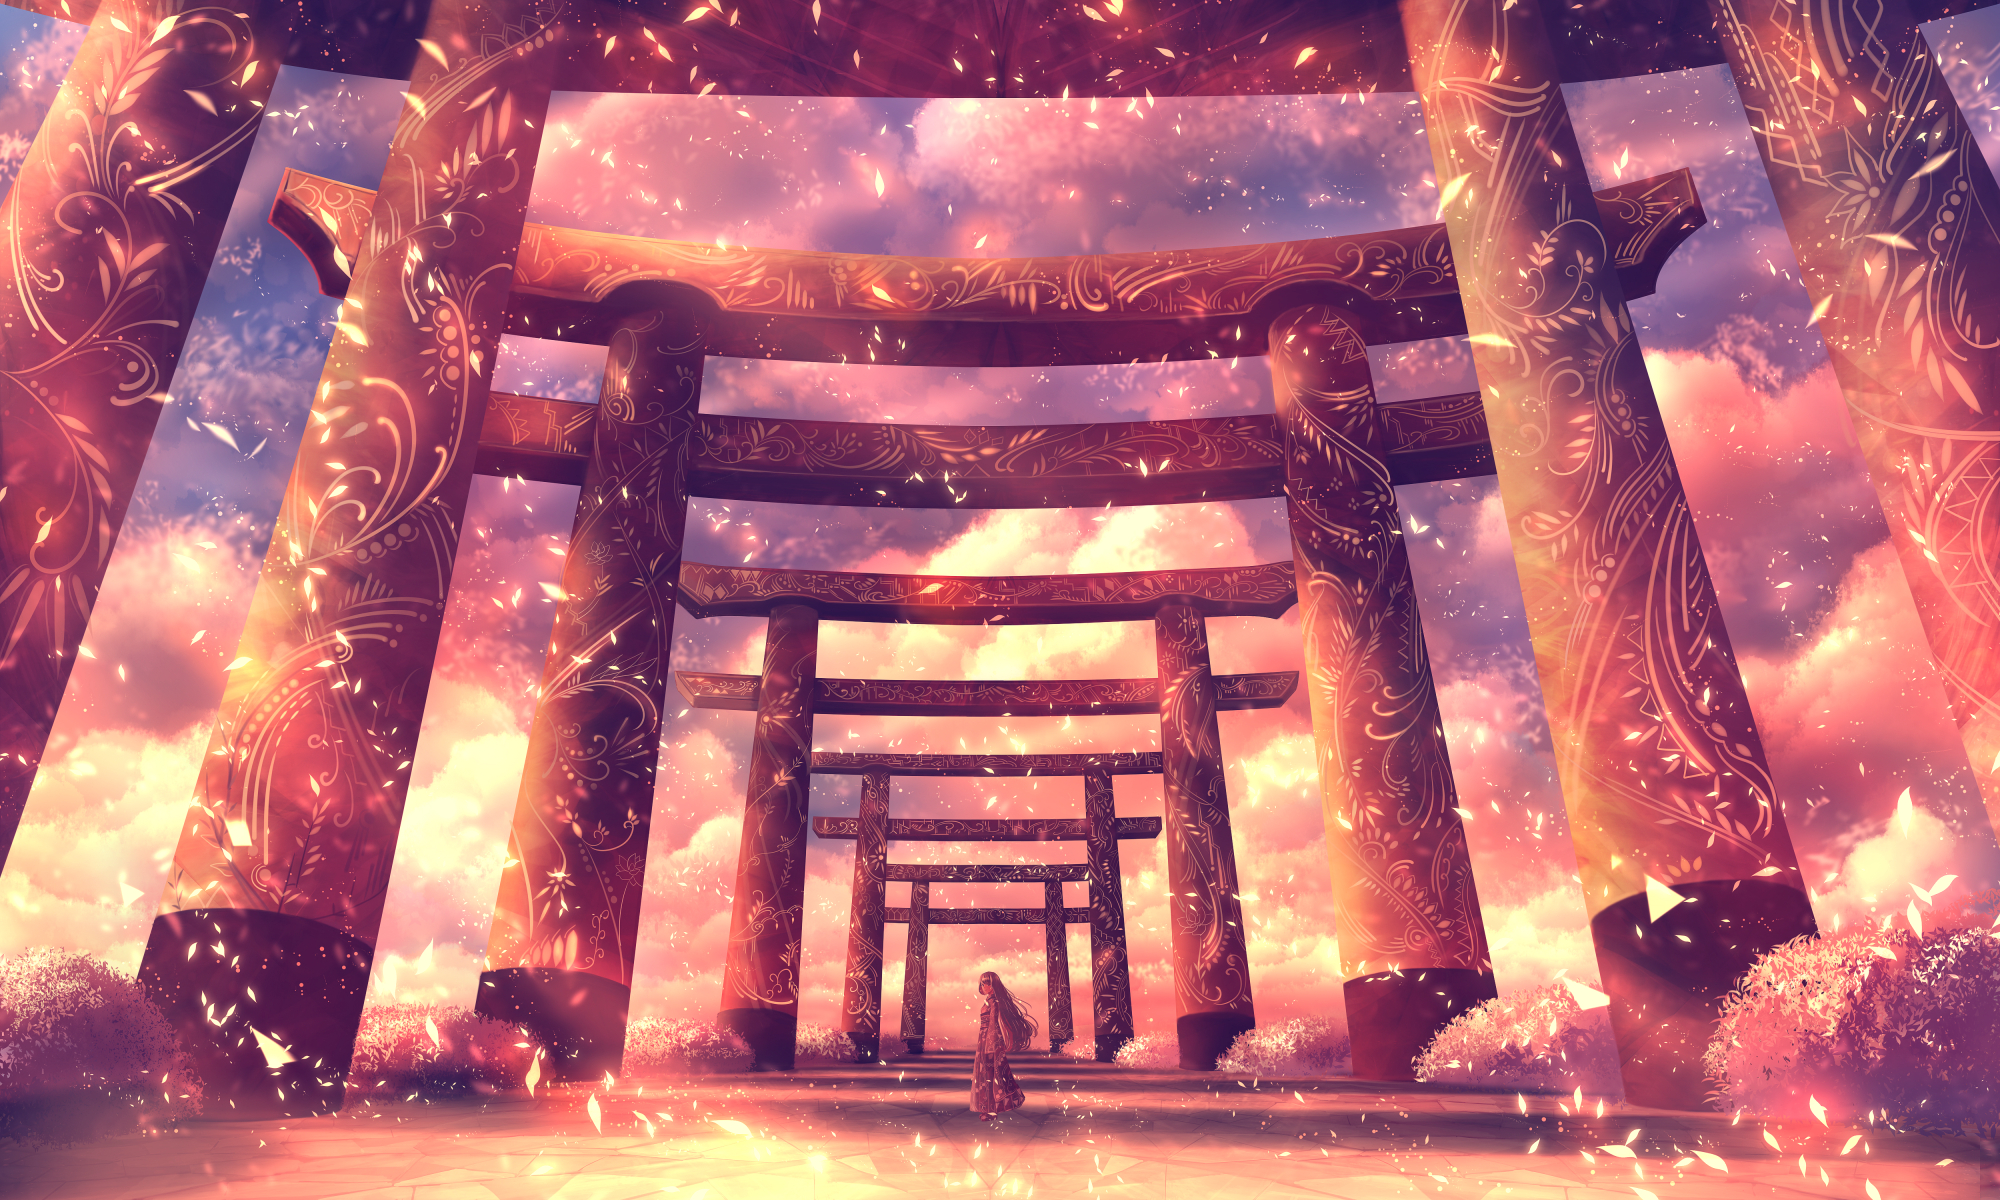 50 Shrine HD Wallpapers and Backgrounds